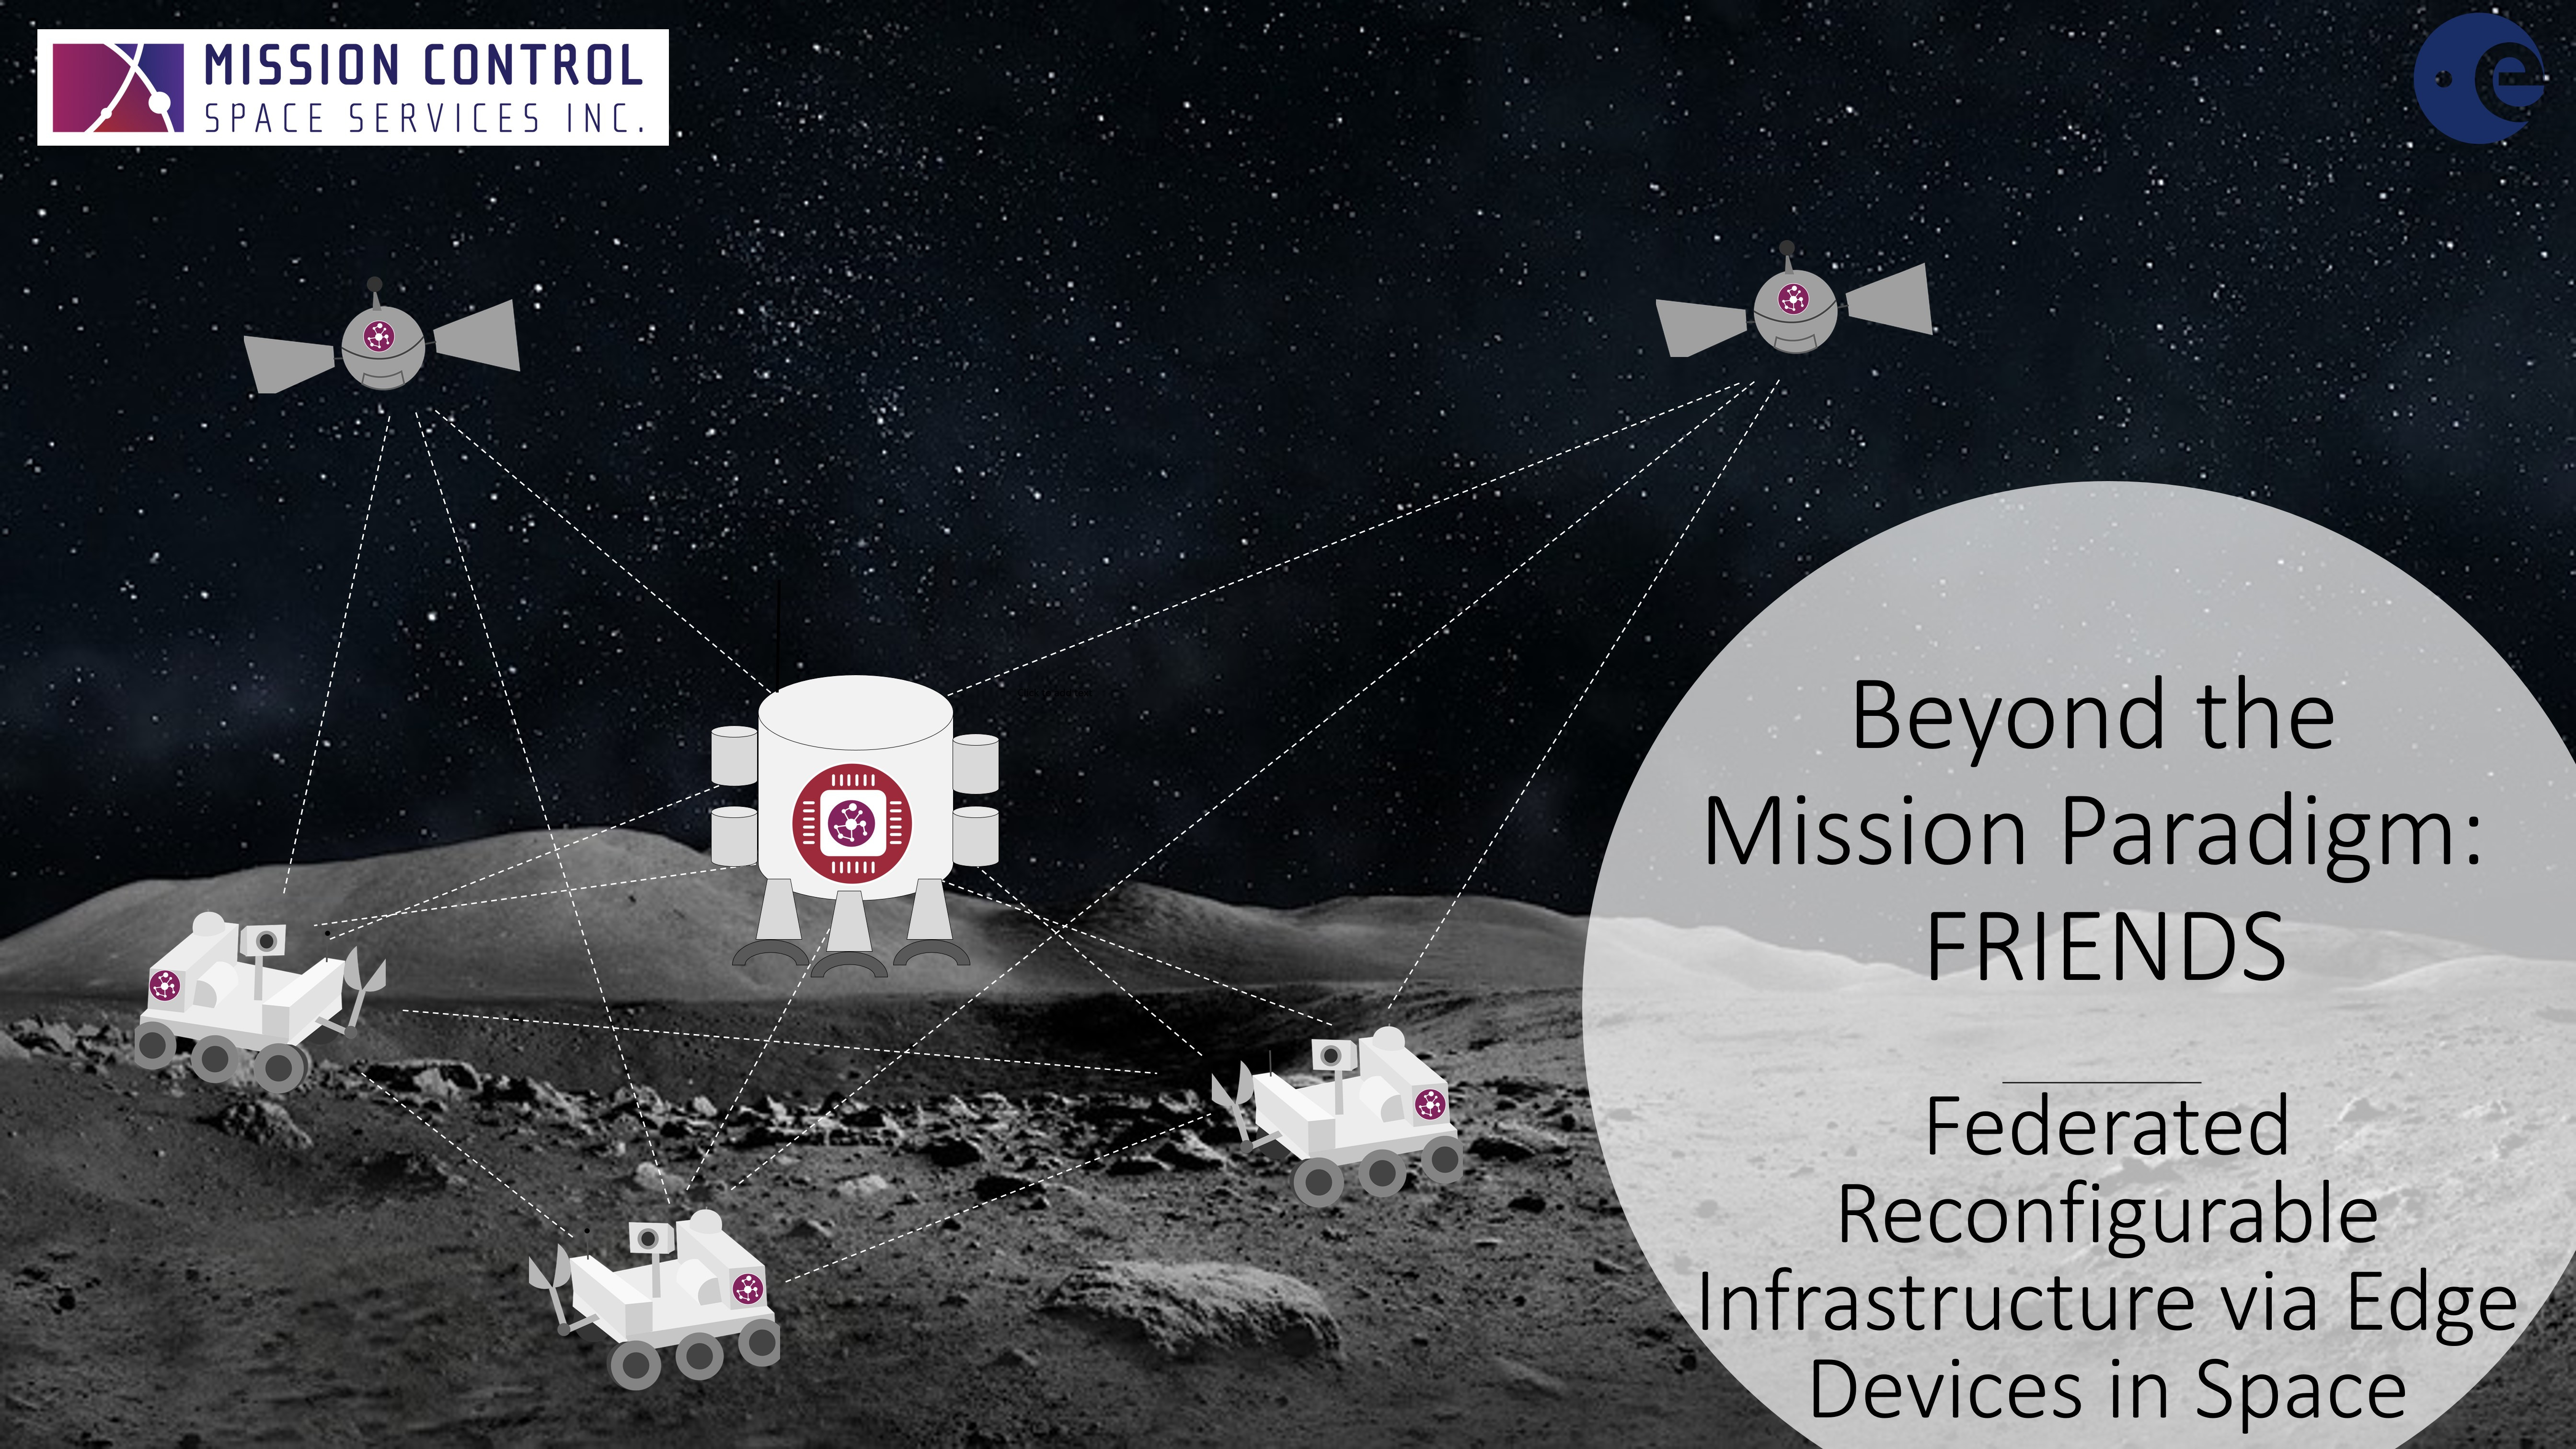 Beyond the Mission Paradigm: Federated Reconfigurable Infrastructure via Edge Devices in Space (FRIENDS)